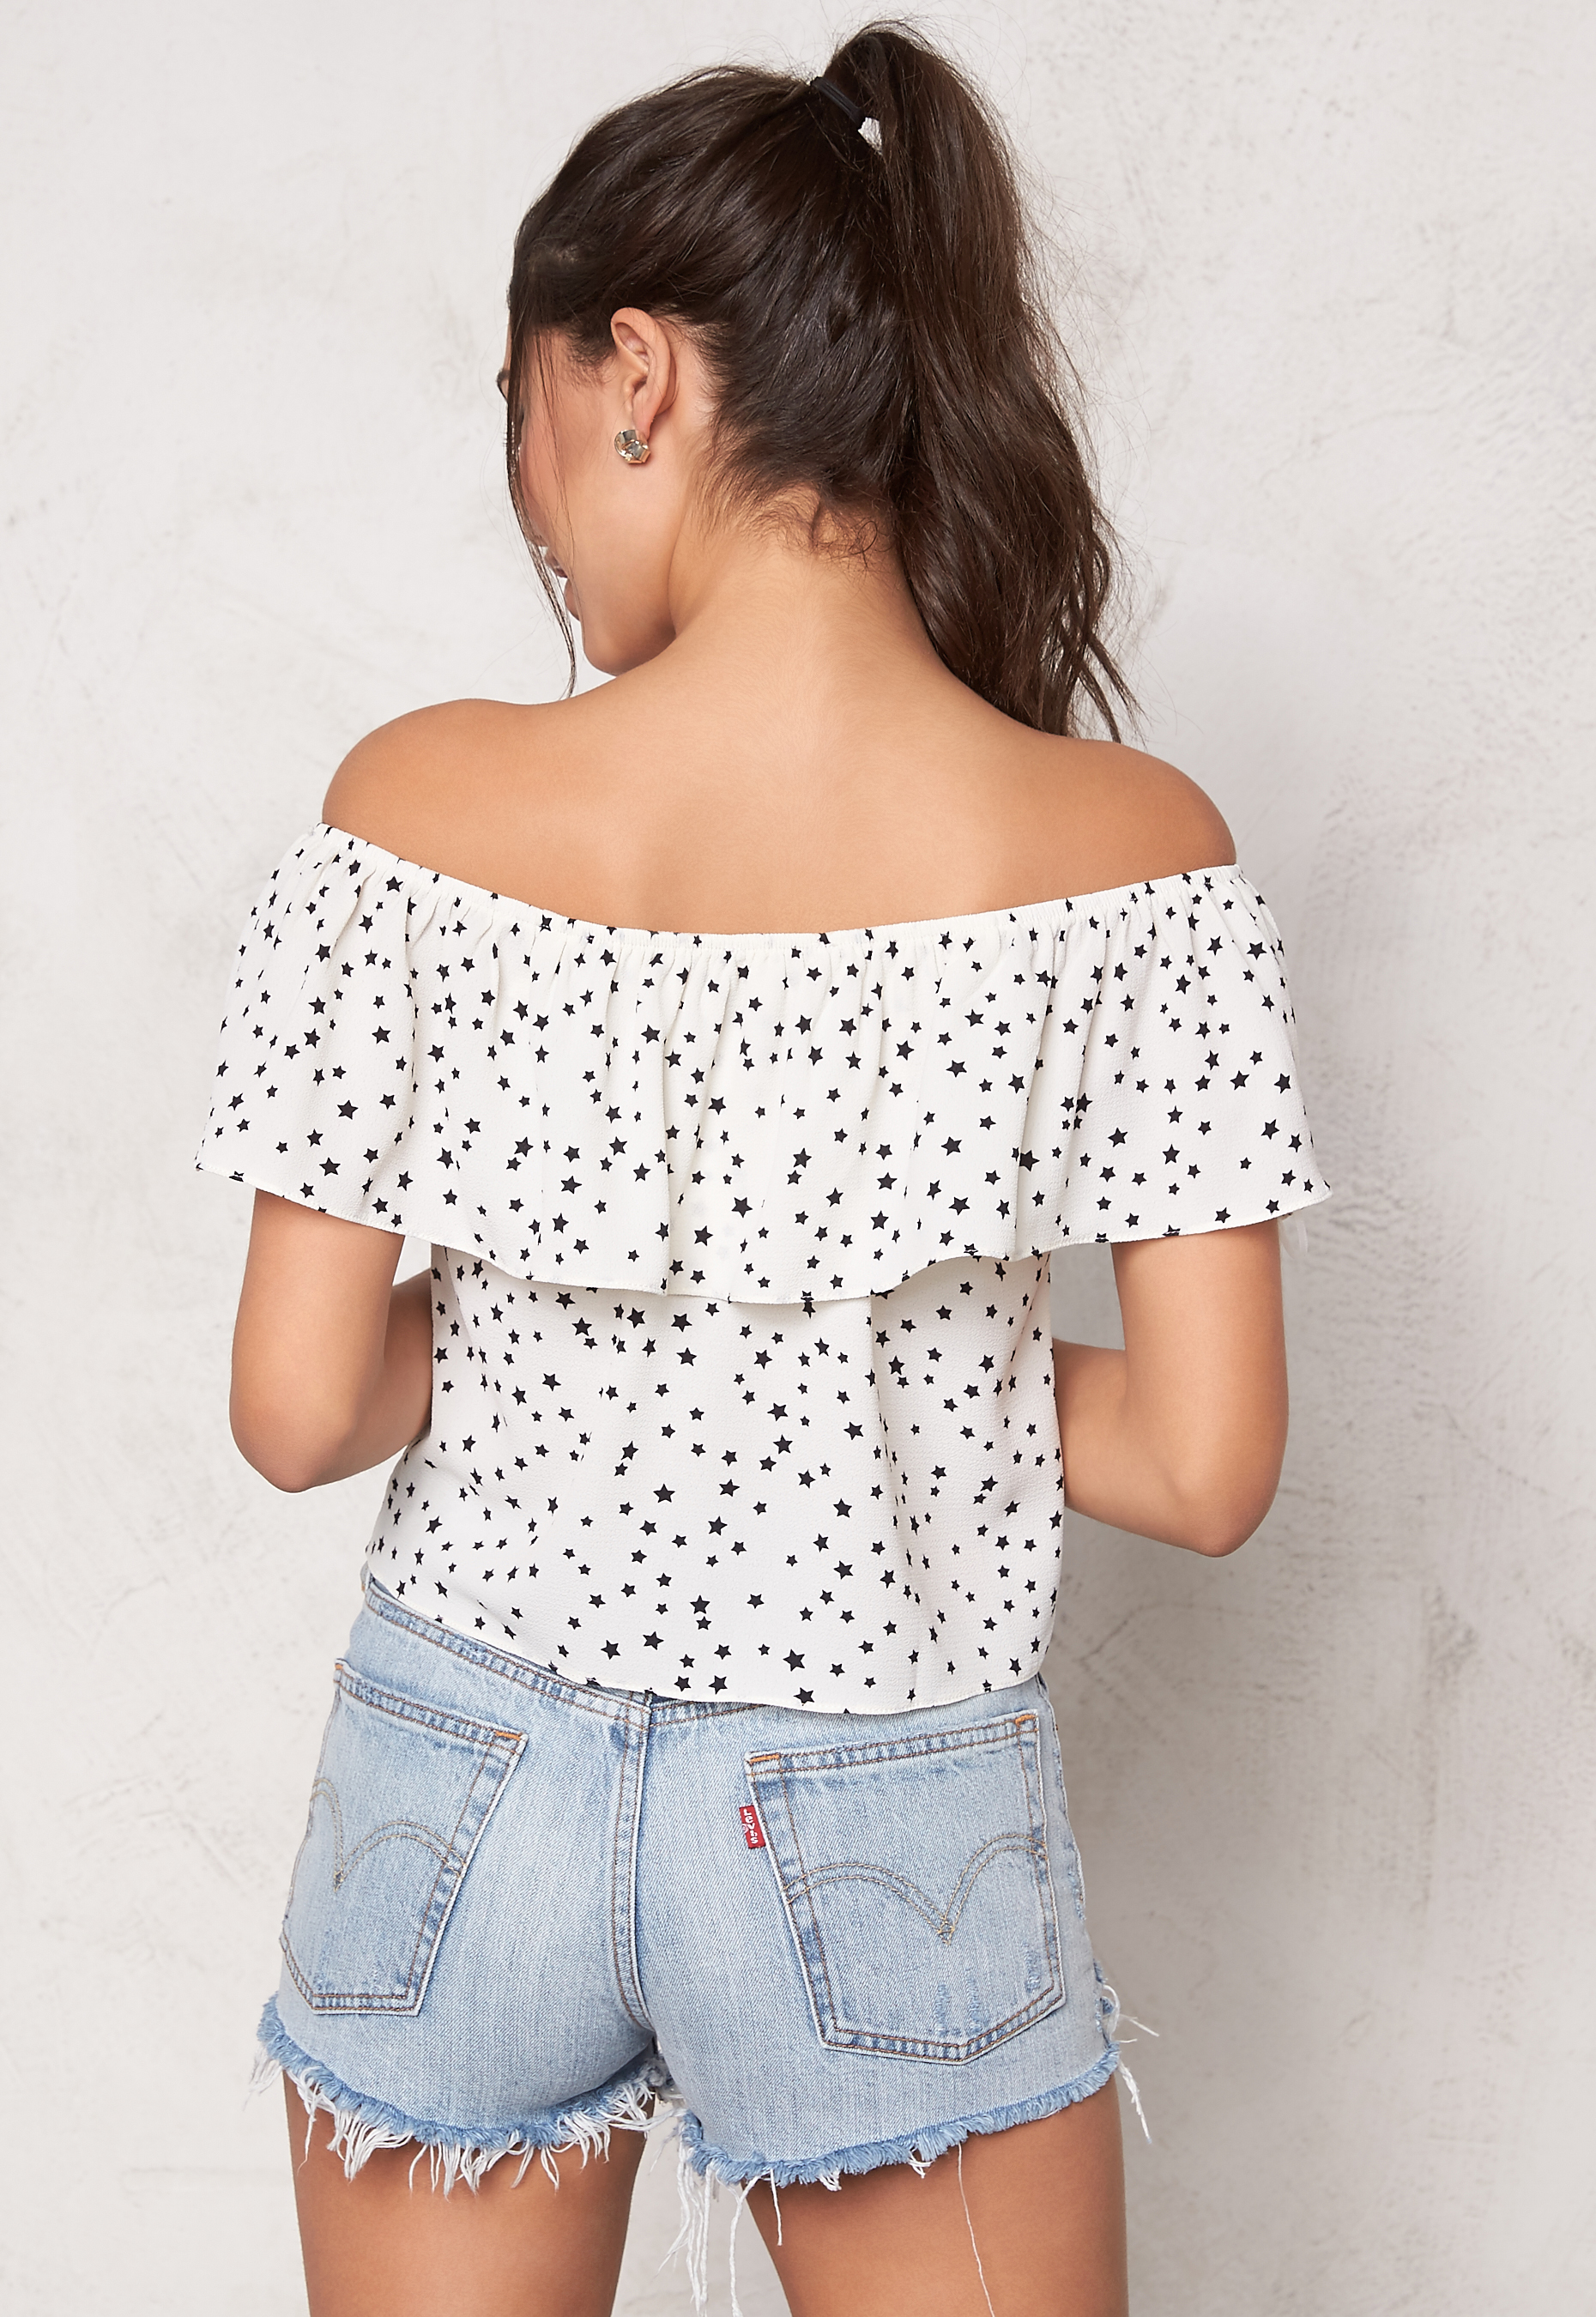 Summer top | girl with a pretty white top and lovely hair 